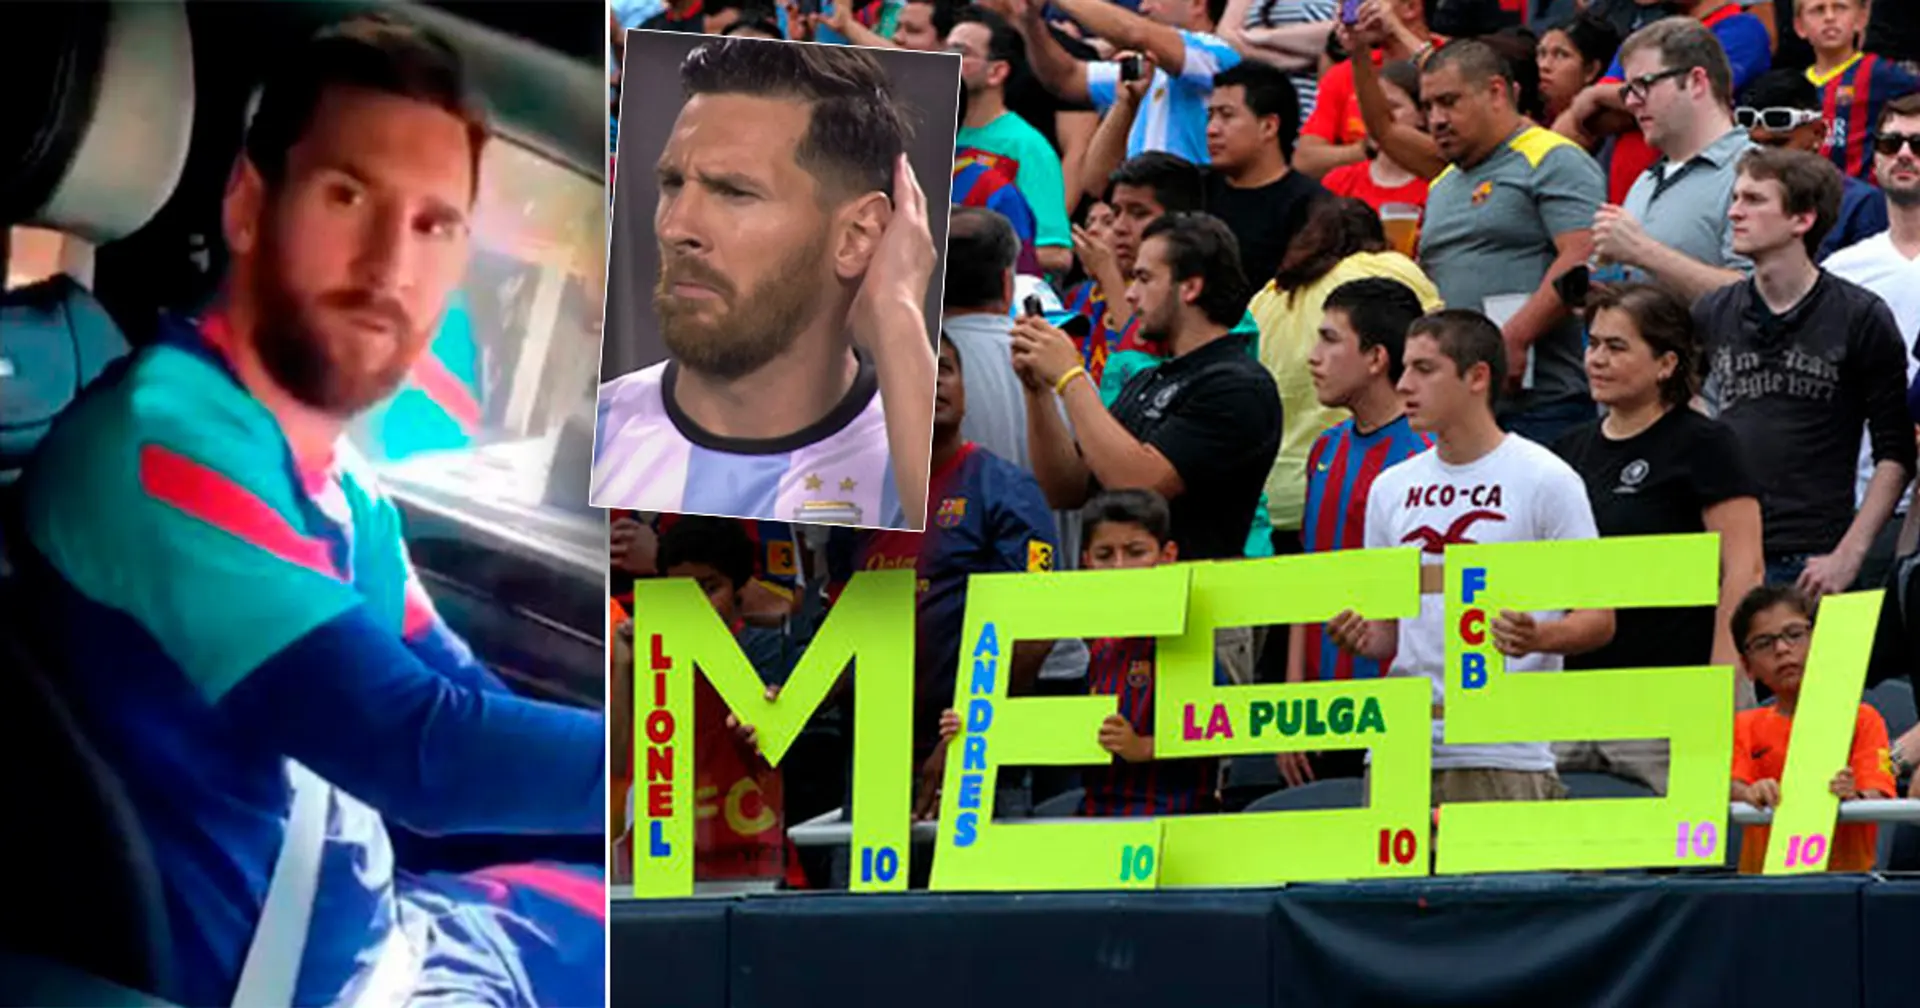 Why is Messi nicknamed La Pulga? You asked - we answered